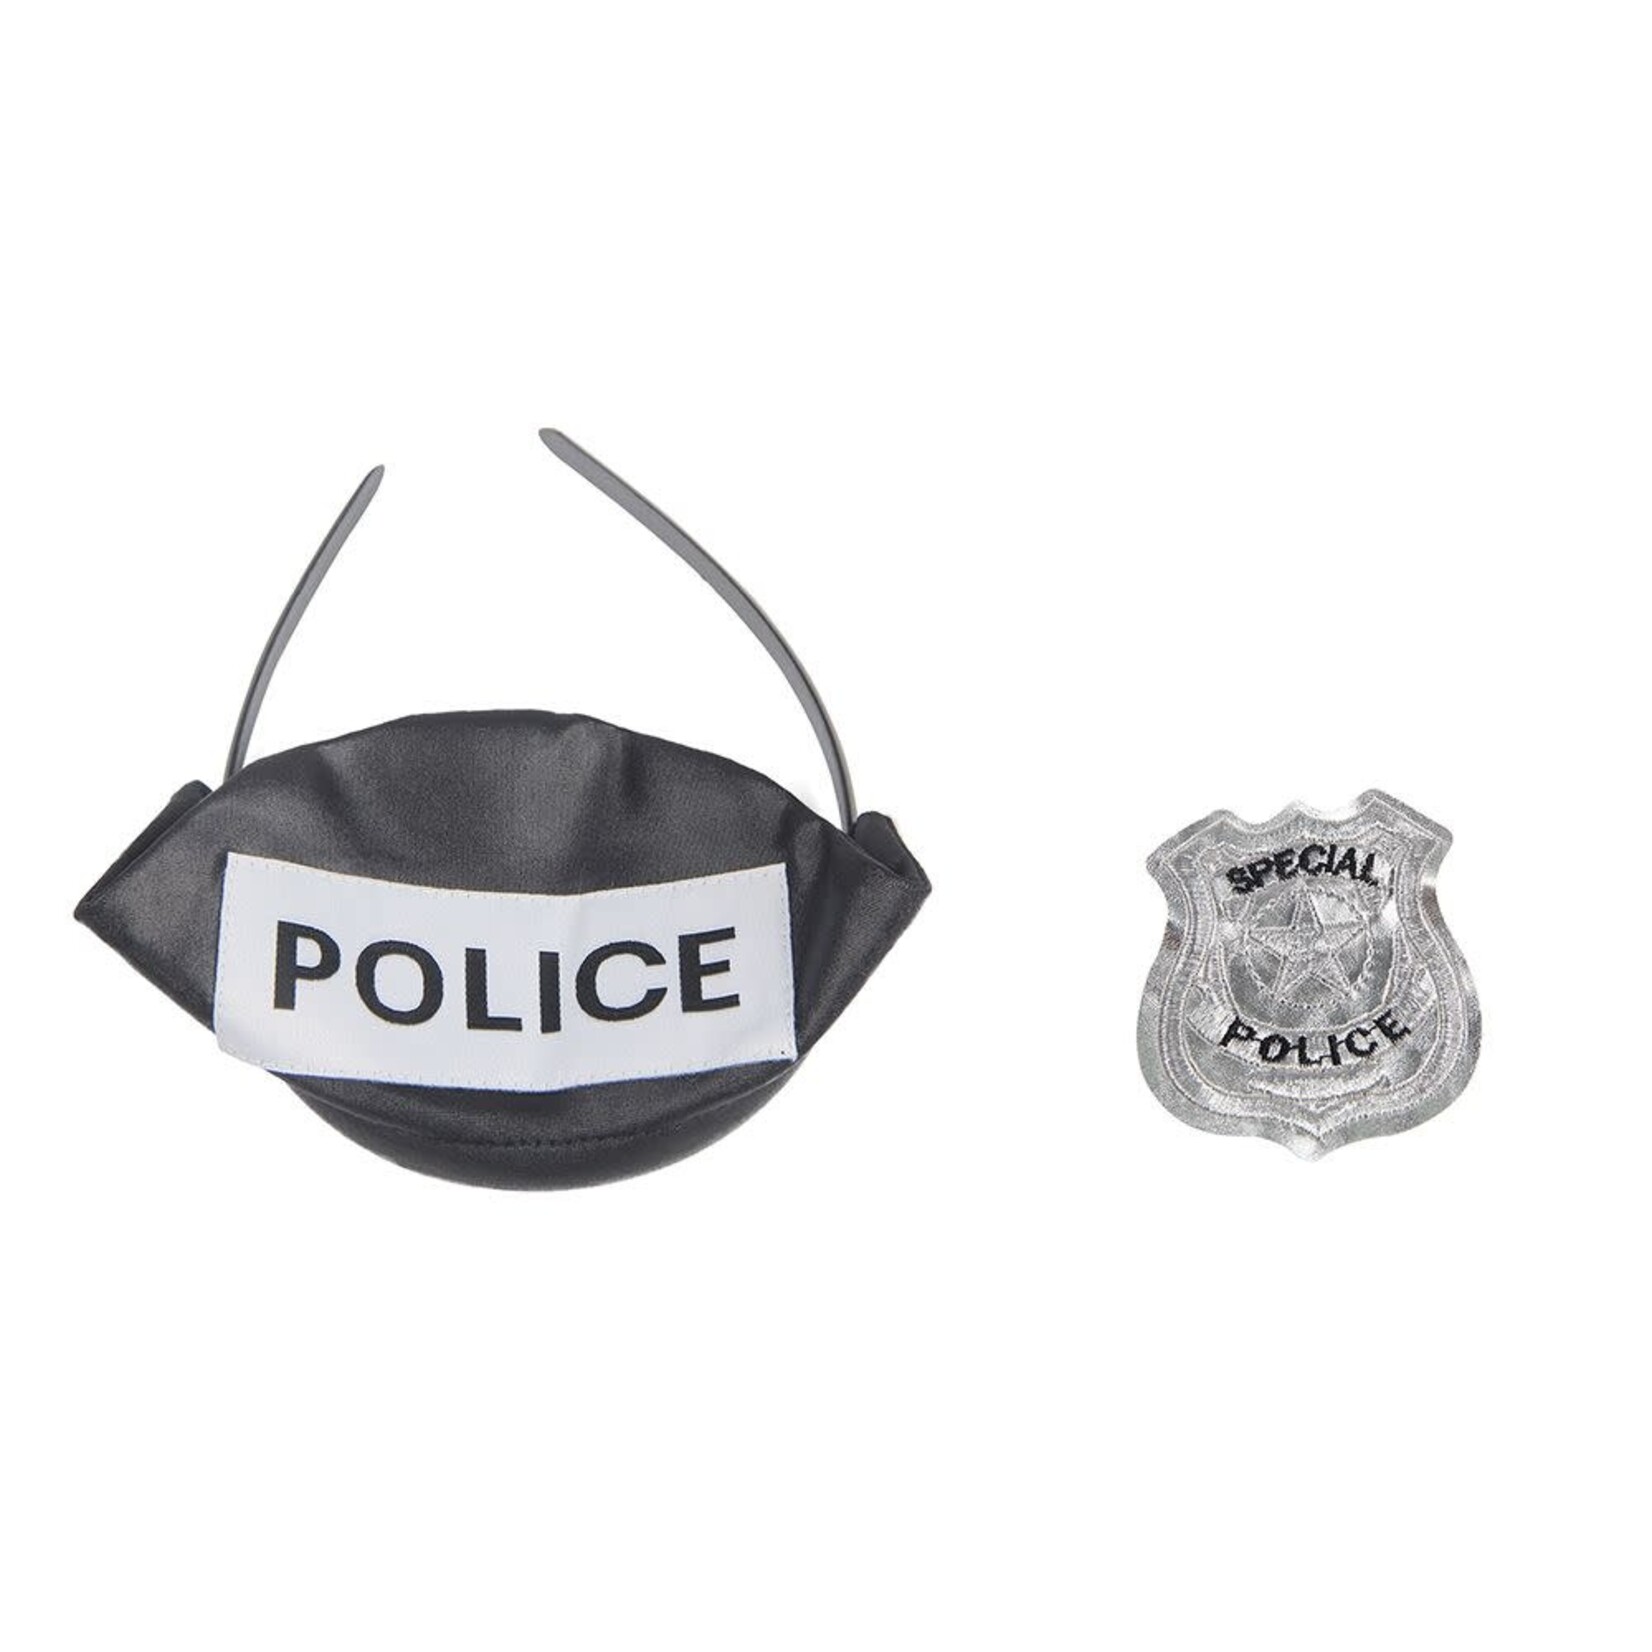 OH YEAH! -  ZIPPER FRONT HOLLOW OUT POLICE COSTUME WITH HEADWEAR 3XL-4XL